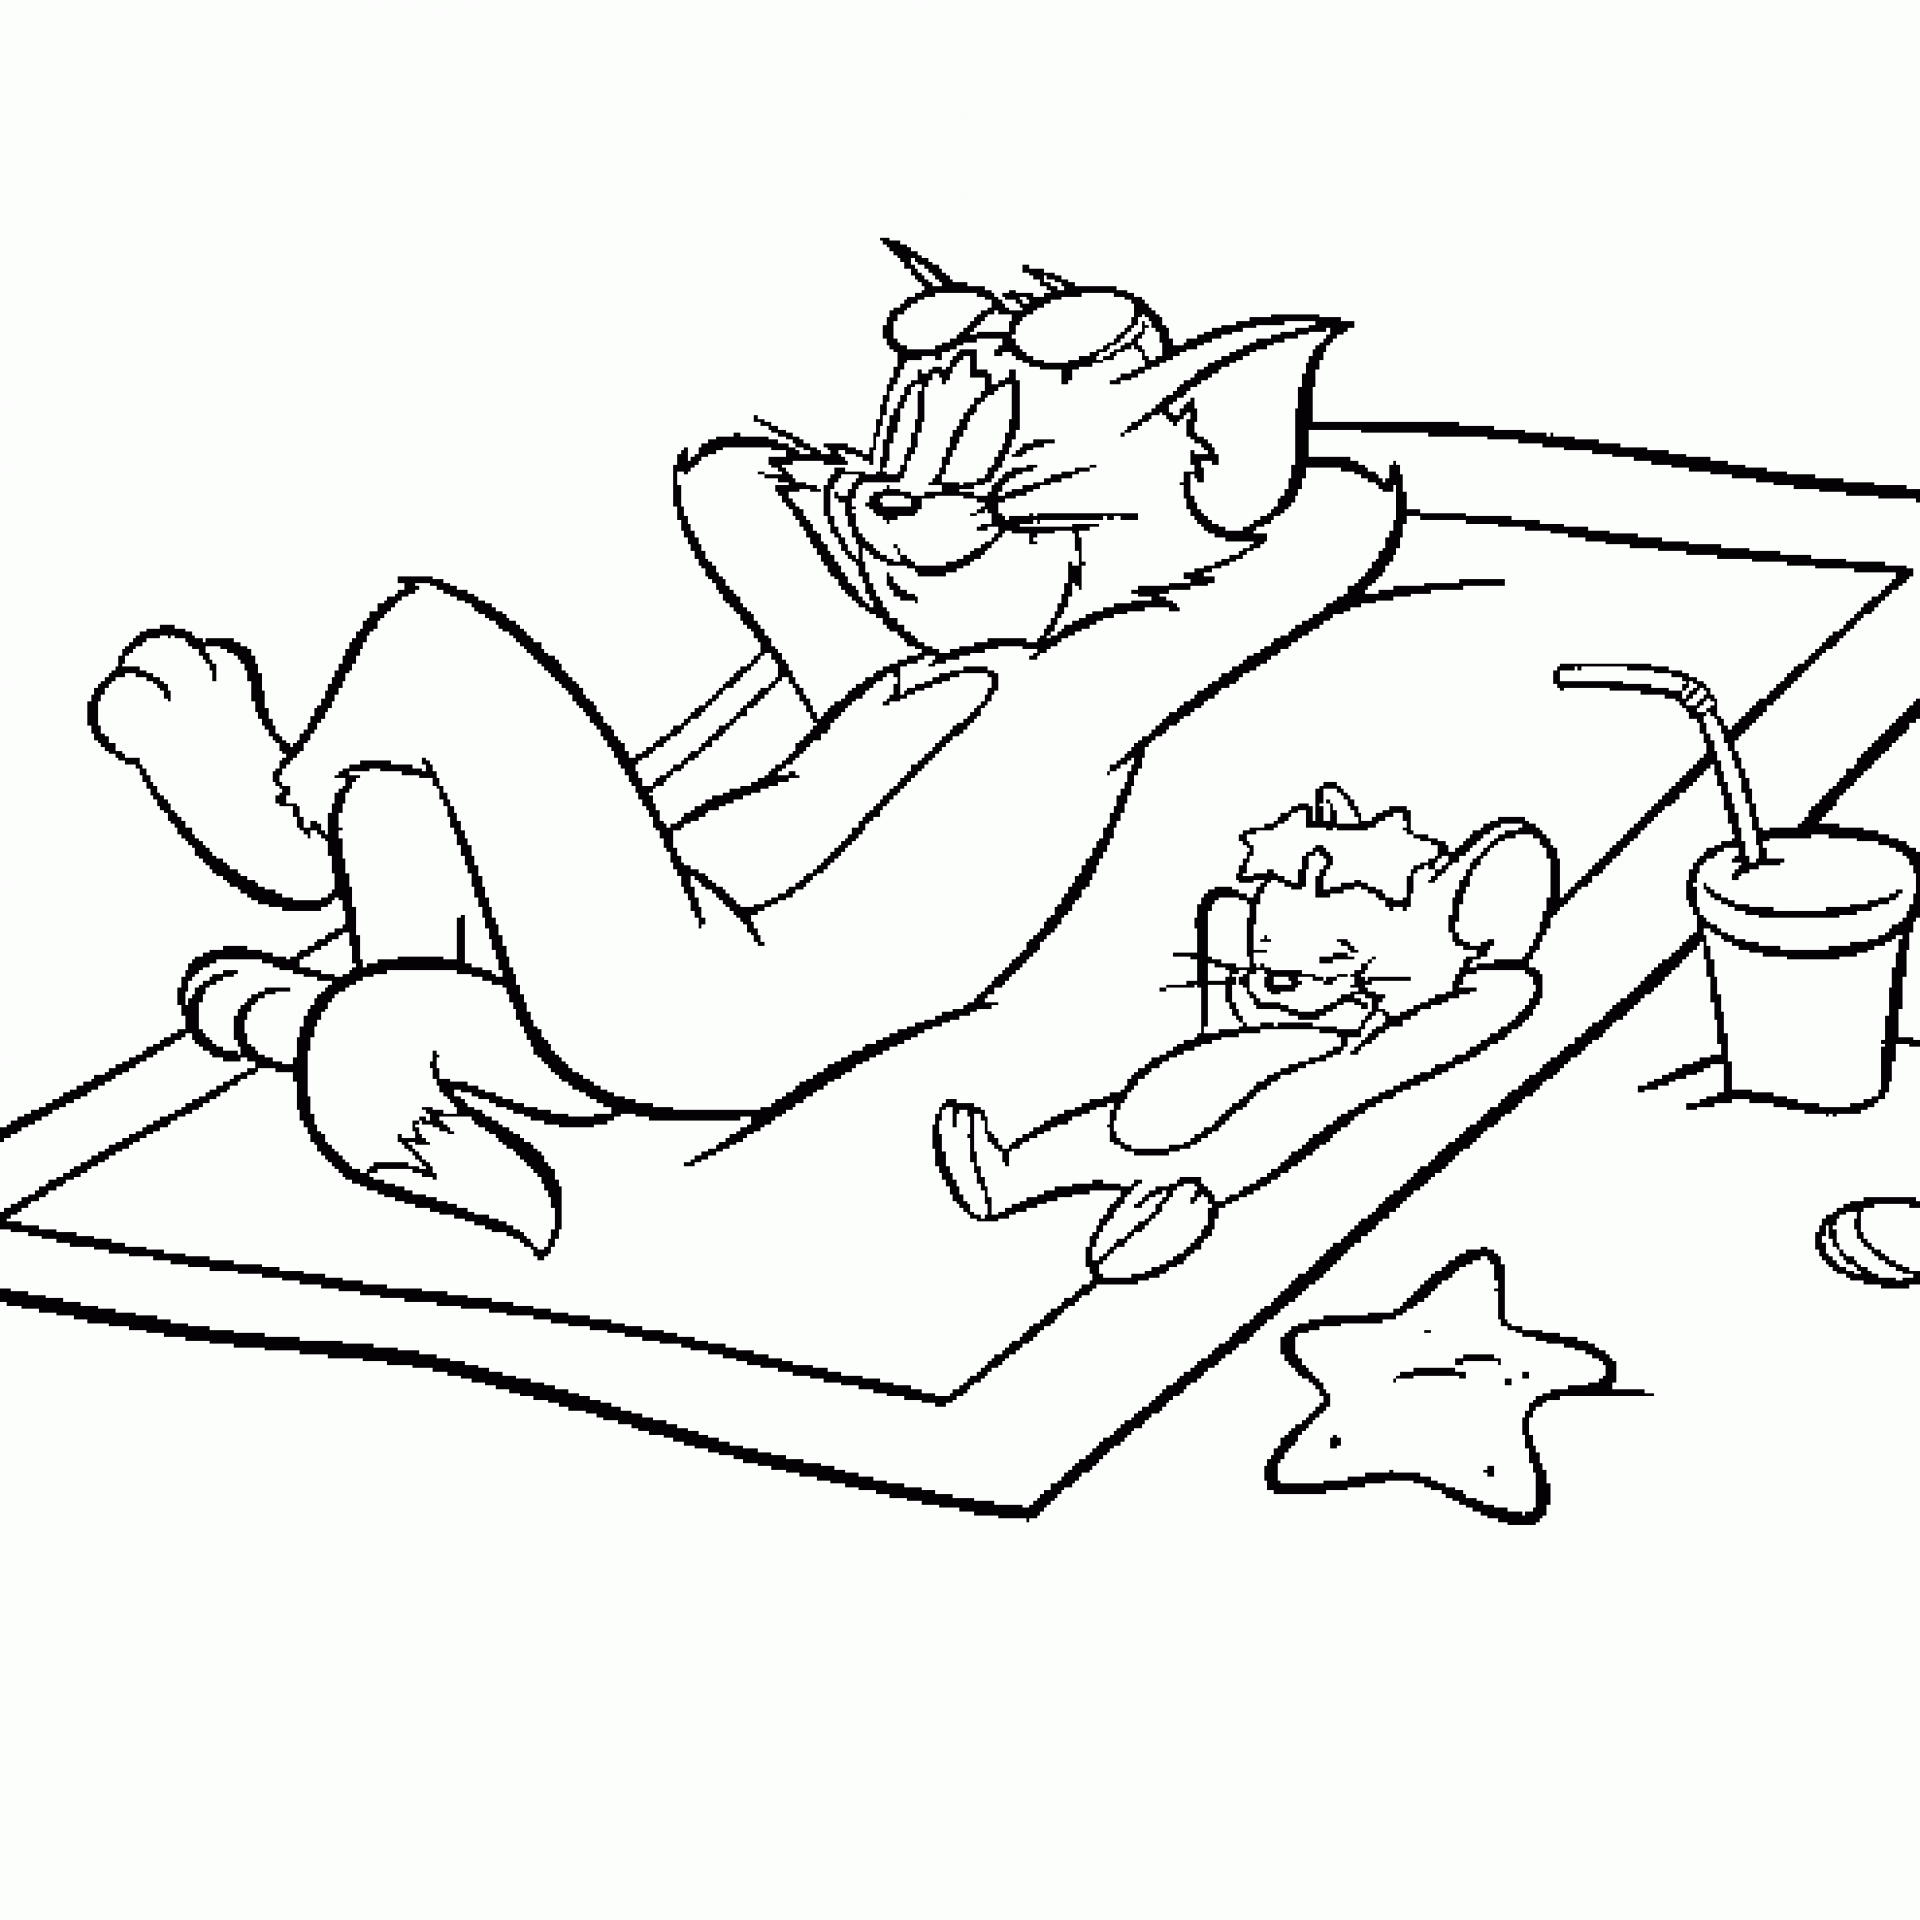 Free Printable Tom And Jerry Coloring Pages For Kids Coloring Wallpapers Download Free Images Wallpaper [coloring654.blogspot.com]